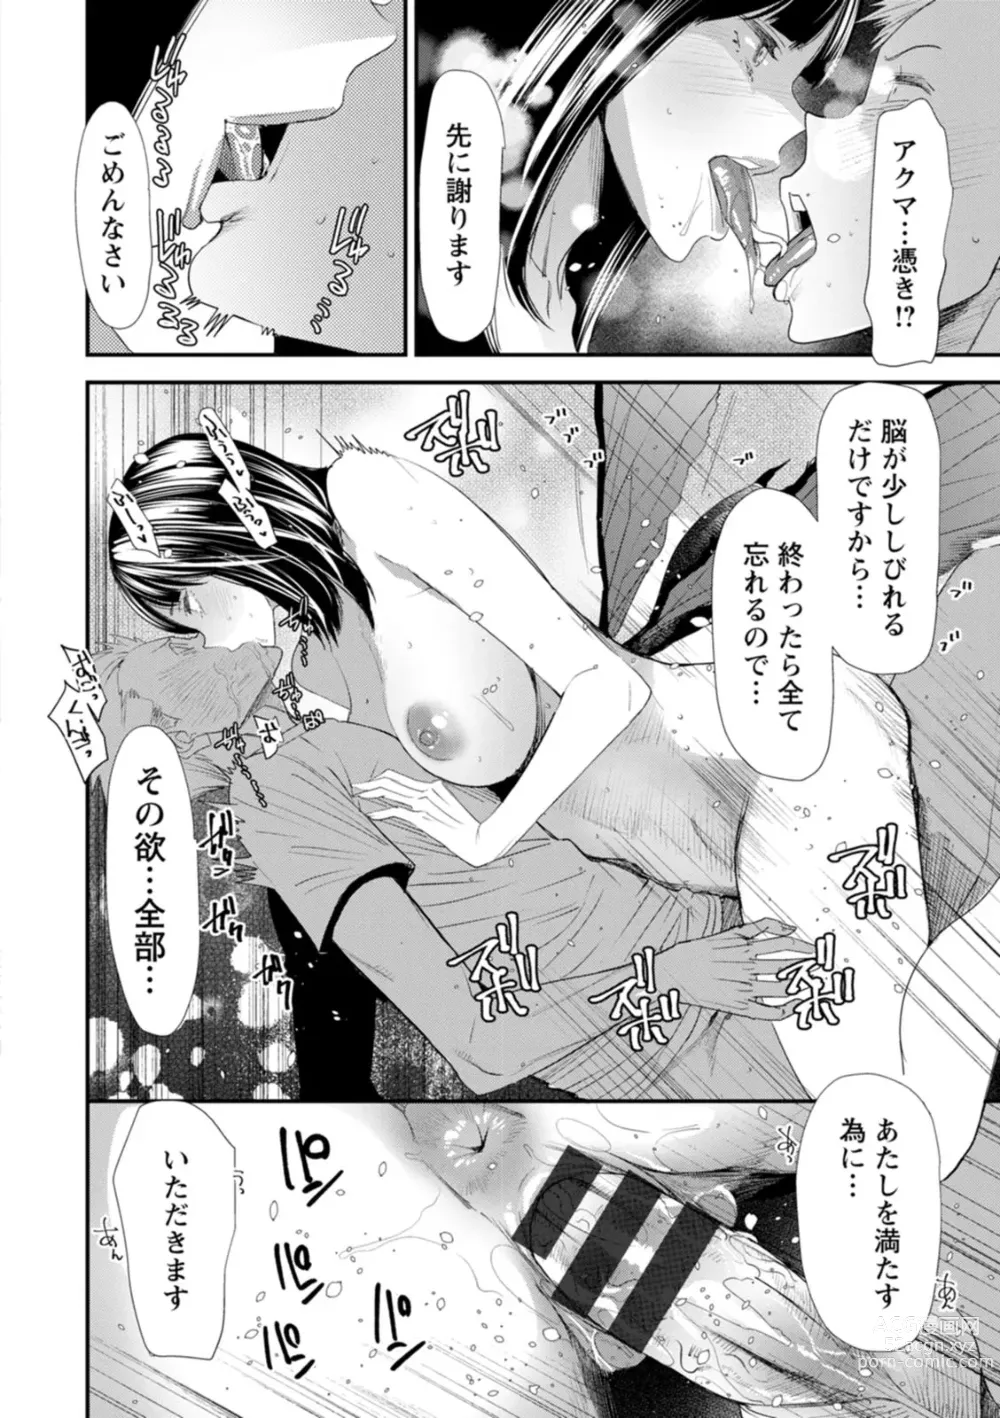 Page 20 of manga Inma Joshi Daisei no Yuuutsu - The Melancholy of the Succubus who is a college student